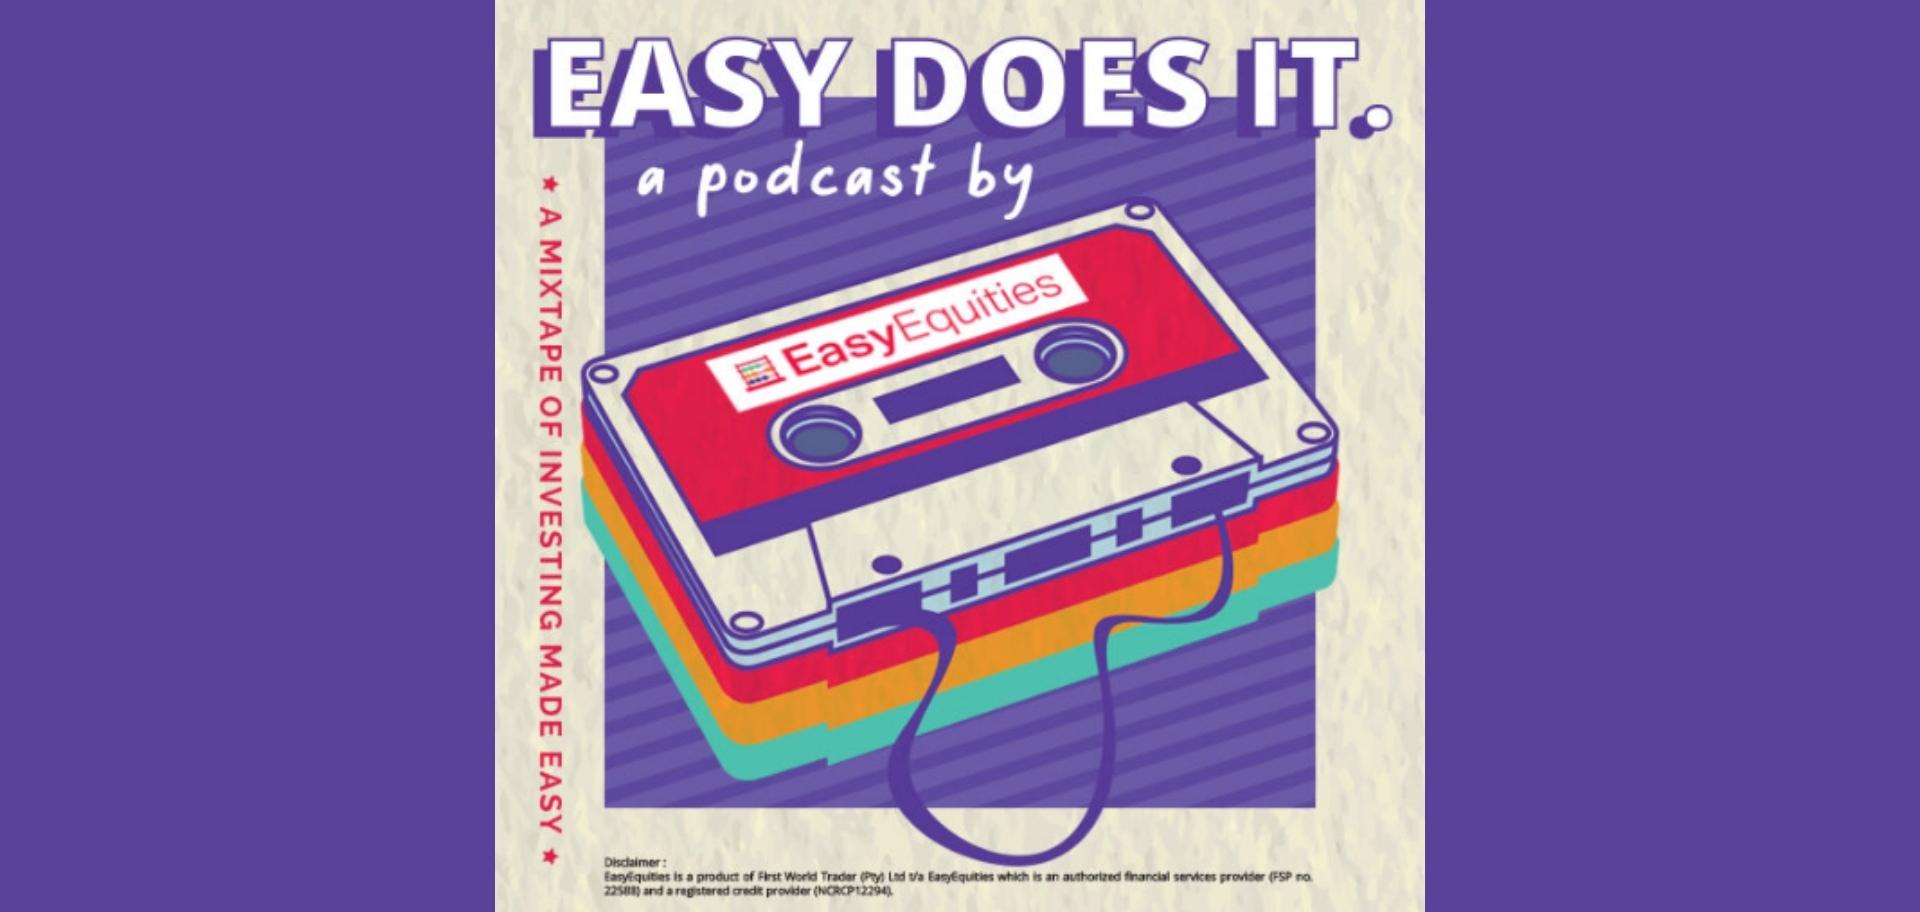 Easy Does It Podcast: Cooking up a Great Portfolio with The Finance Ghost